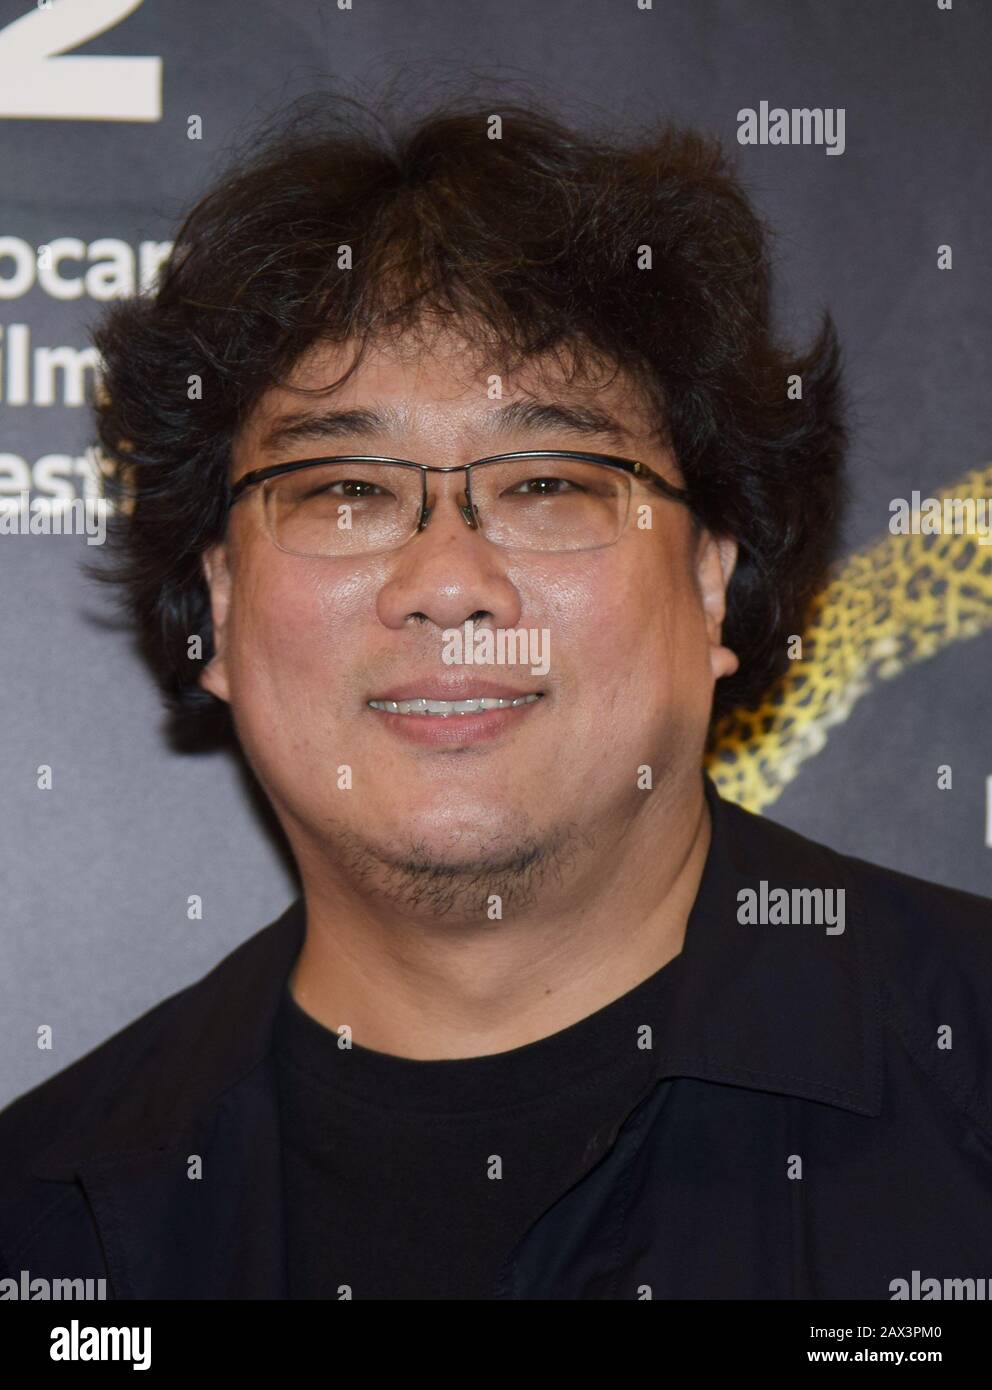 Milan, Italy. 10th Feb, 2020. Locarno, Switzerland Locarno Film Festival 2019 Switzerland, Red carpet For the film Parasite by director BONG Joon-ho, SONG Kang-ho actor receives the Excellence Award In the picture: director BONG Joon-ho Credit: Independent Photo Agency/Alamy Live News Stock Photo